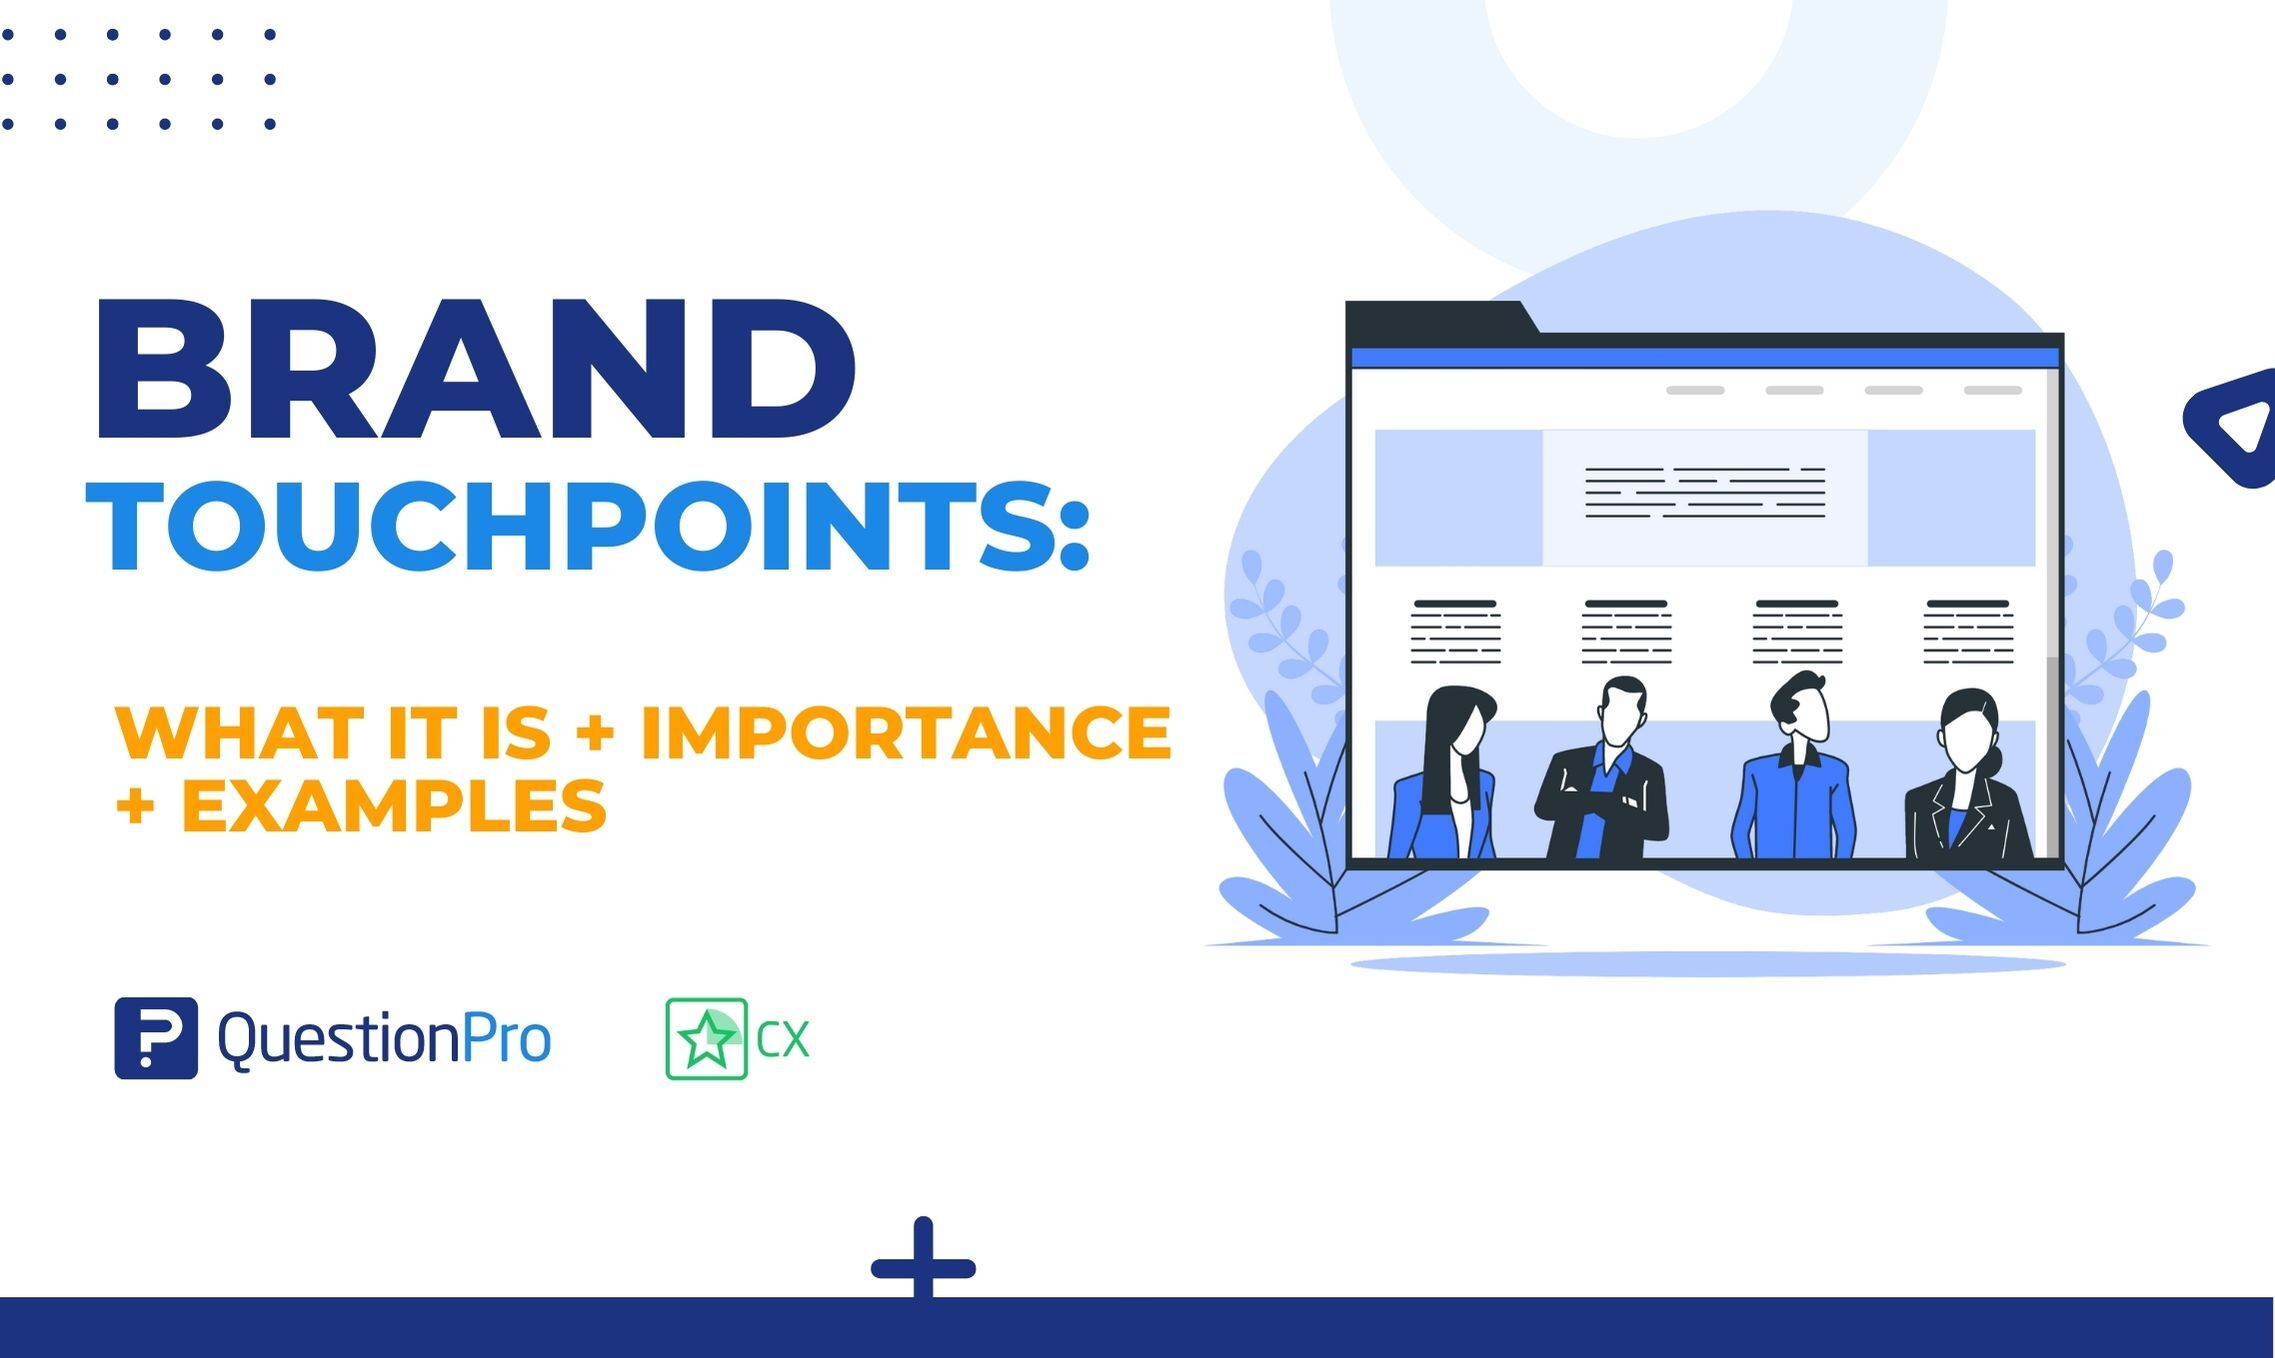 Brand touchpoints make or break your business, so they need to be well-planned + organized to wow your customers and keep them coming back.